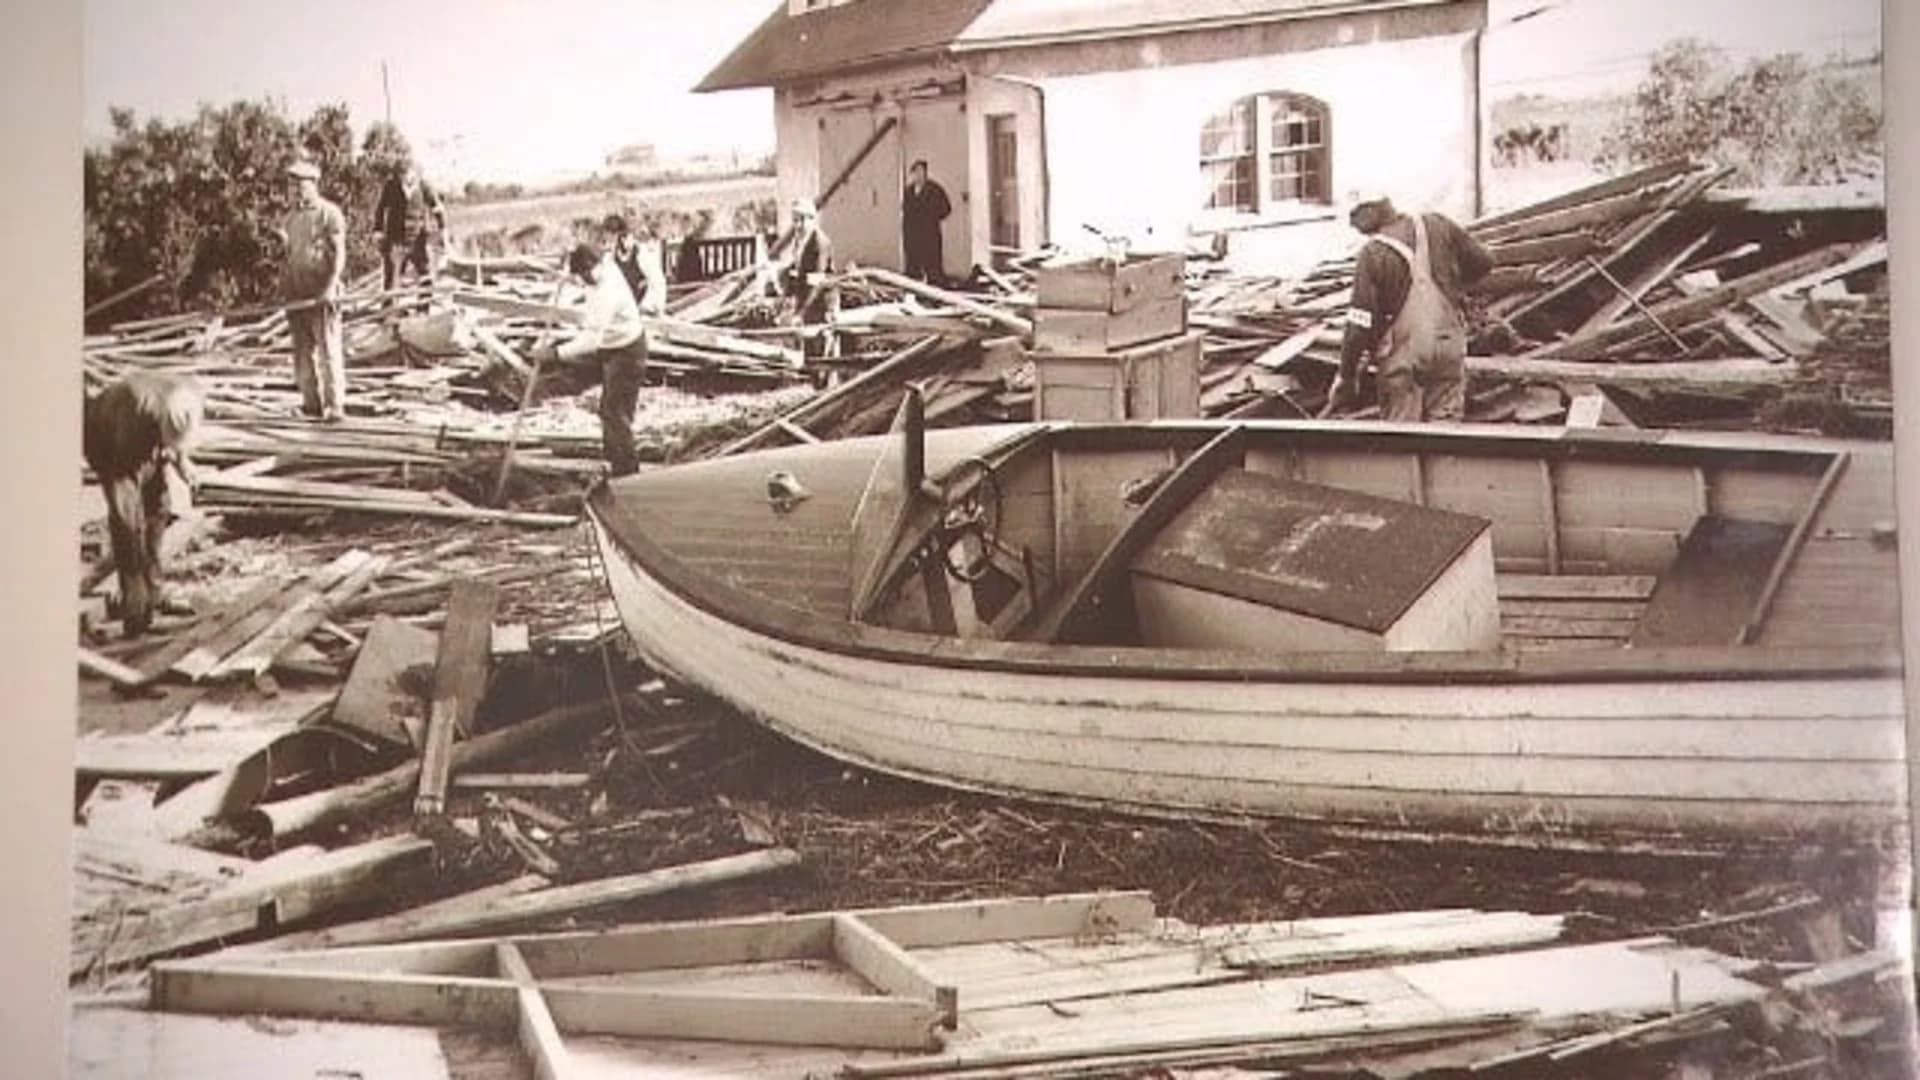 'Nobody expected it': The monster storm that pummeled LI 80 years ago